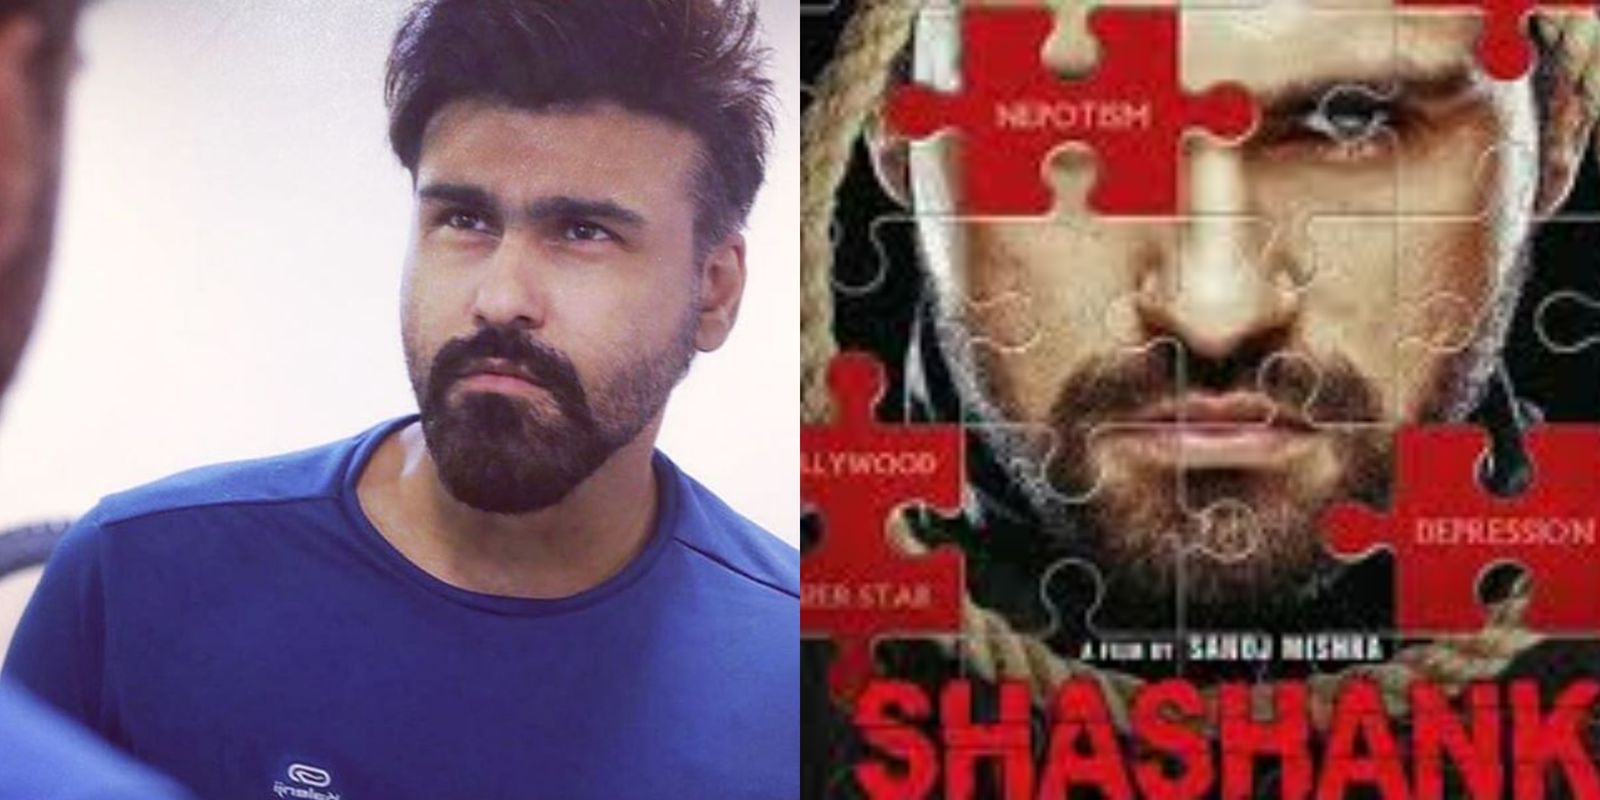 Aarya Babbar To Star In Film Loosely Based On Sushant’s Life, Says, ‘You Can’t Run A Social Media Trial Against It’ 